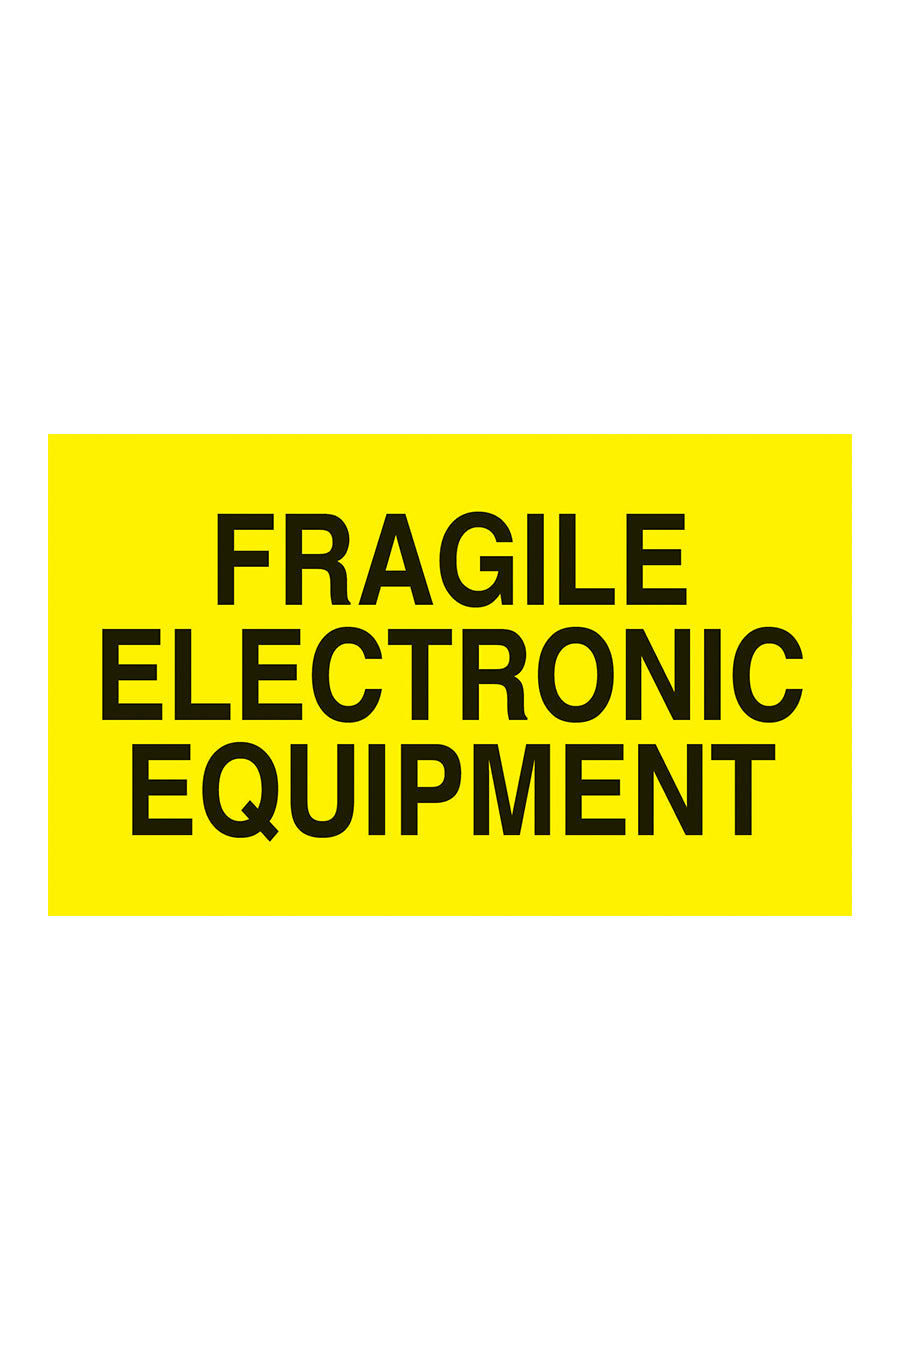 "Fragile Electronic Equipment", 3" x 5", Fluorescent Yellow, 500 Labels/Roll